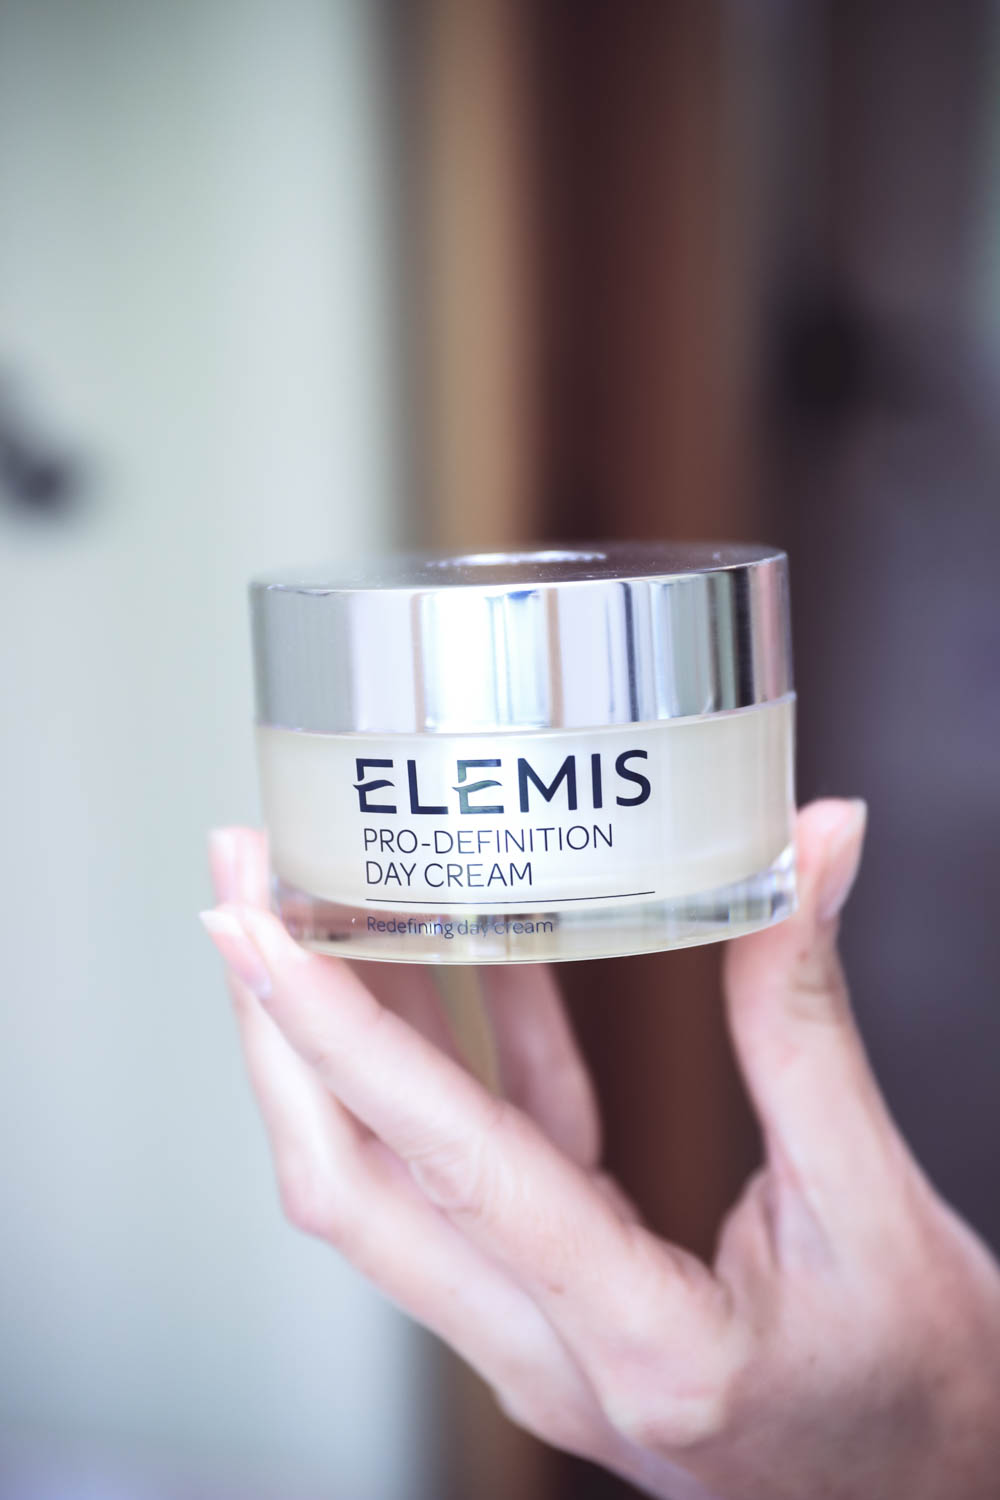 Elemis Day Cream from QVC, spa like moisturizer for daytime, reviewed by Beauty Blogger Erin Busbee, Beauty over 40